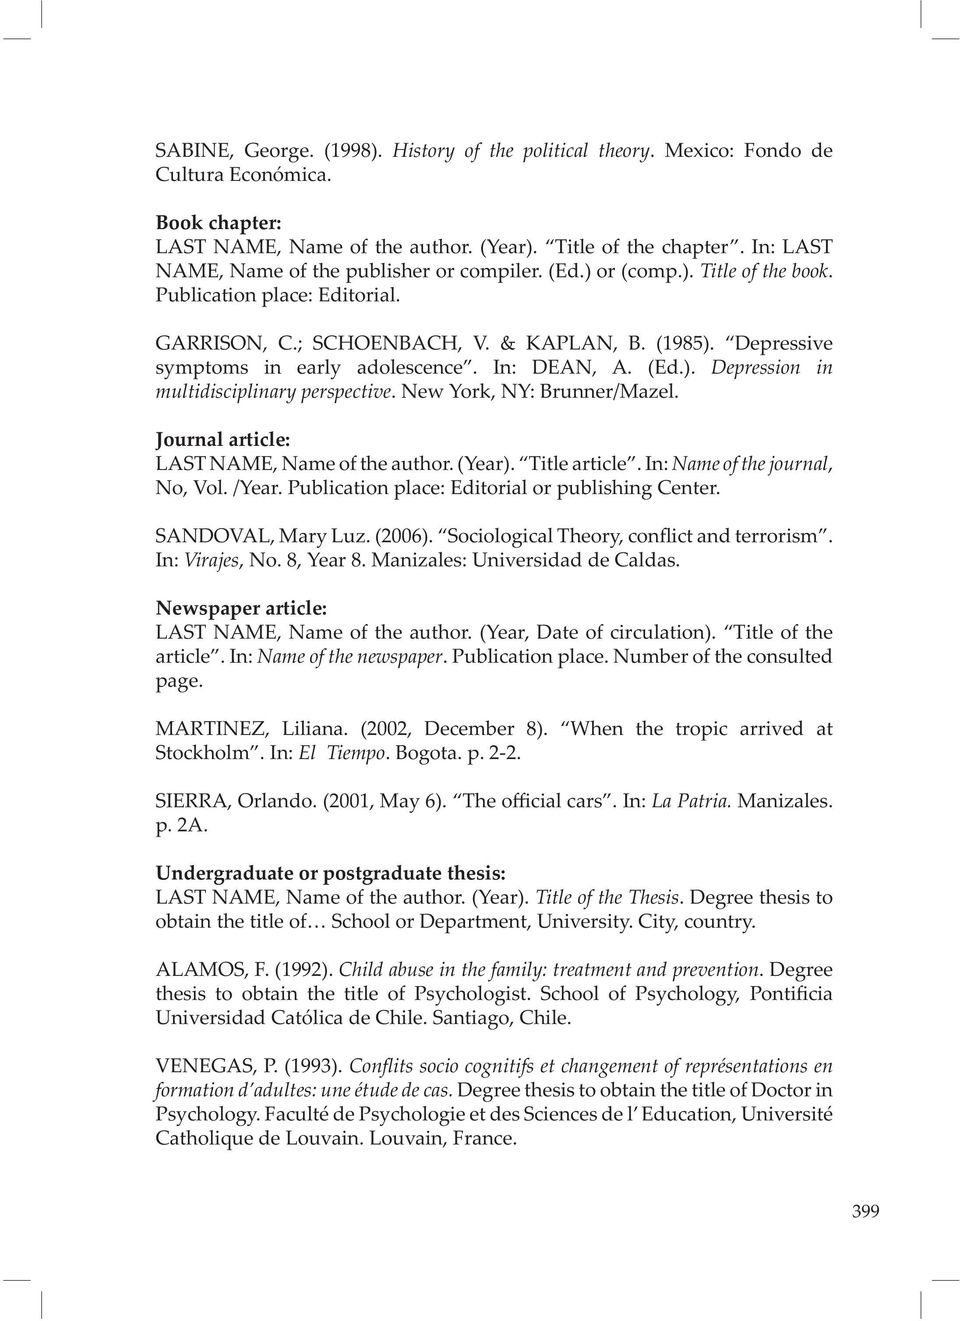 New York, NY: Brunner/Mazel. Journal article: LAST NAME, Name of the author. (Year). Title article. In: Name of the journal, No, Vol. /Year. Publication place: Editorial or publishing Center.